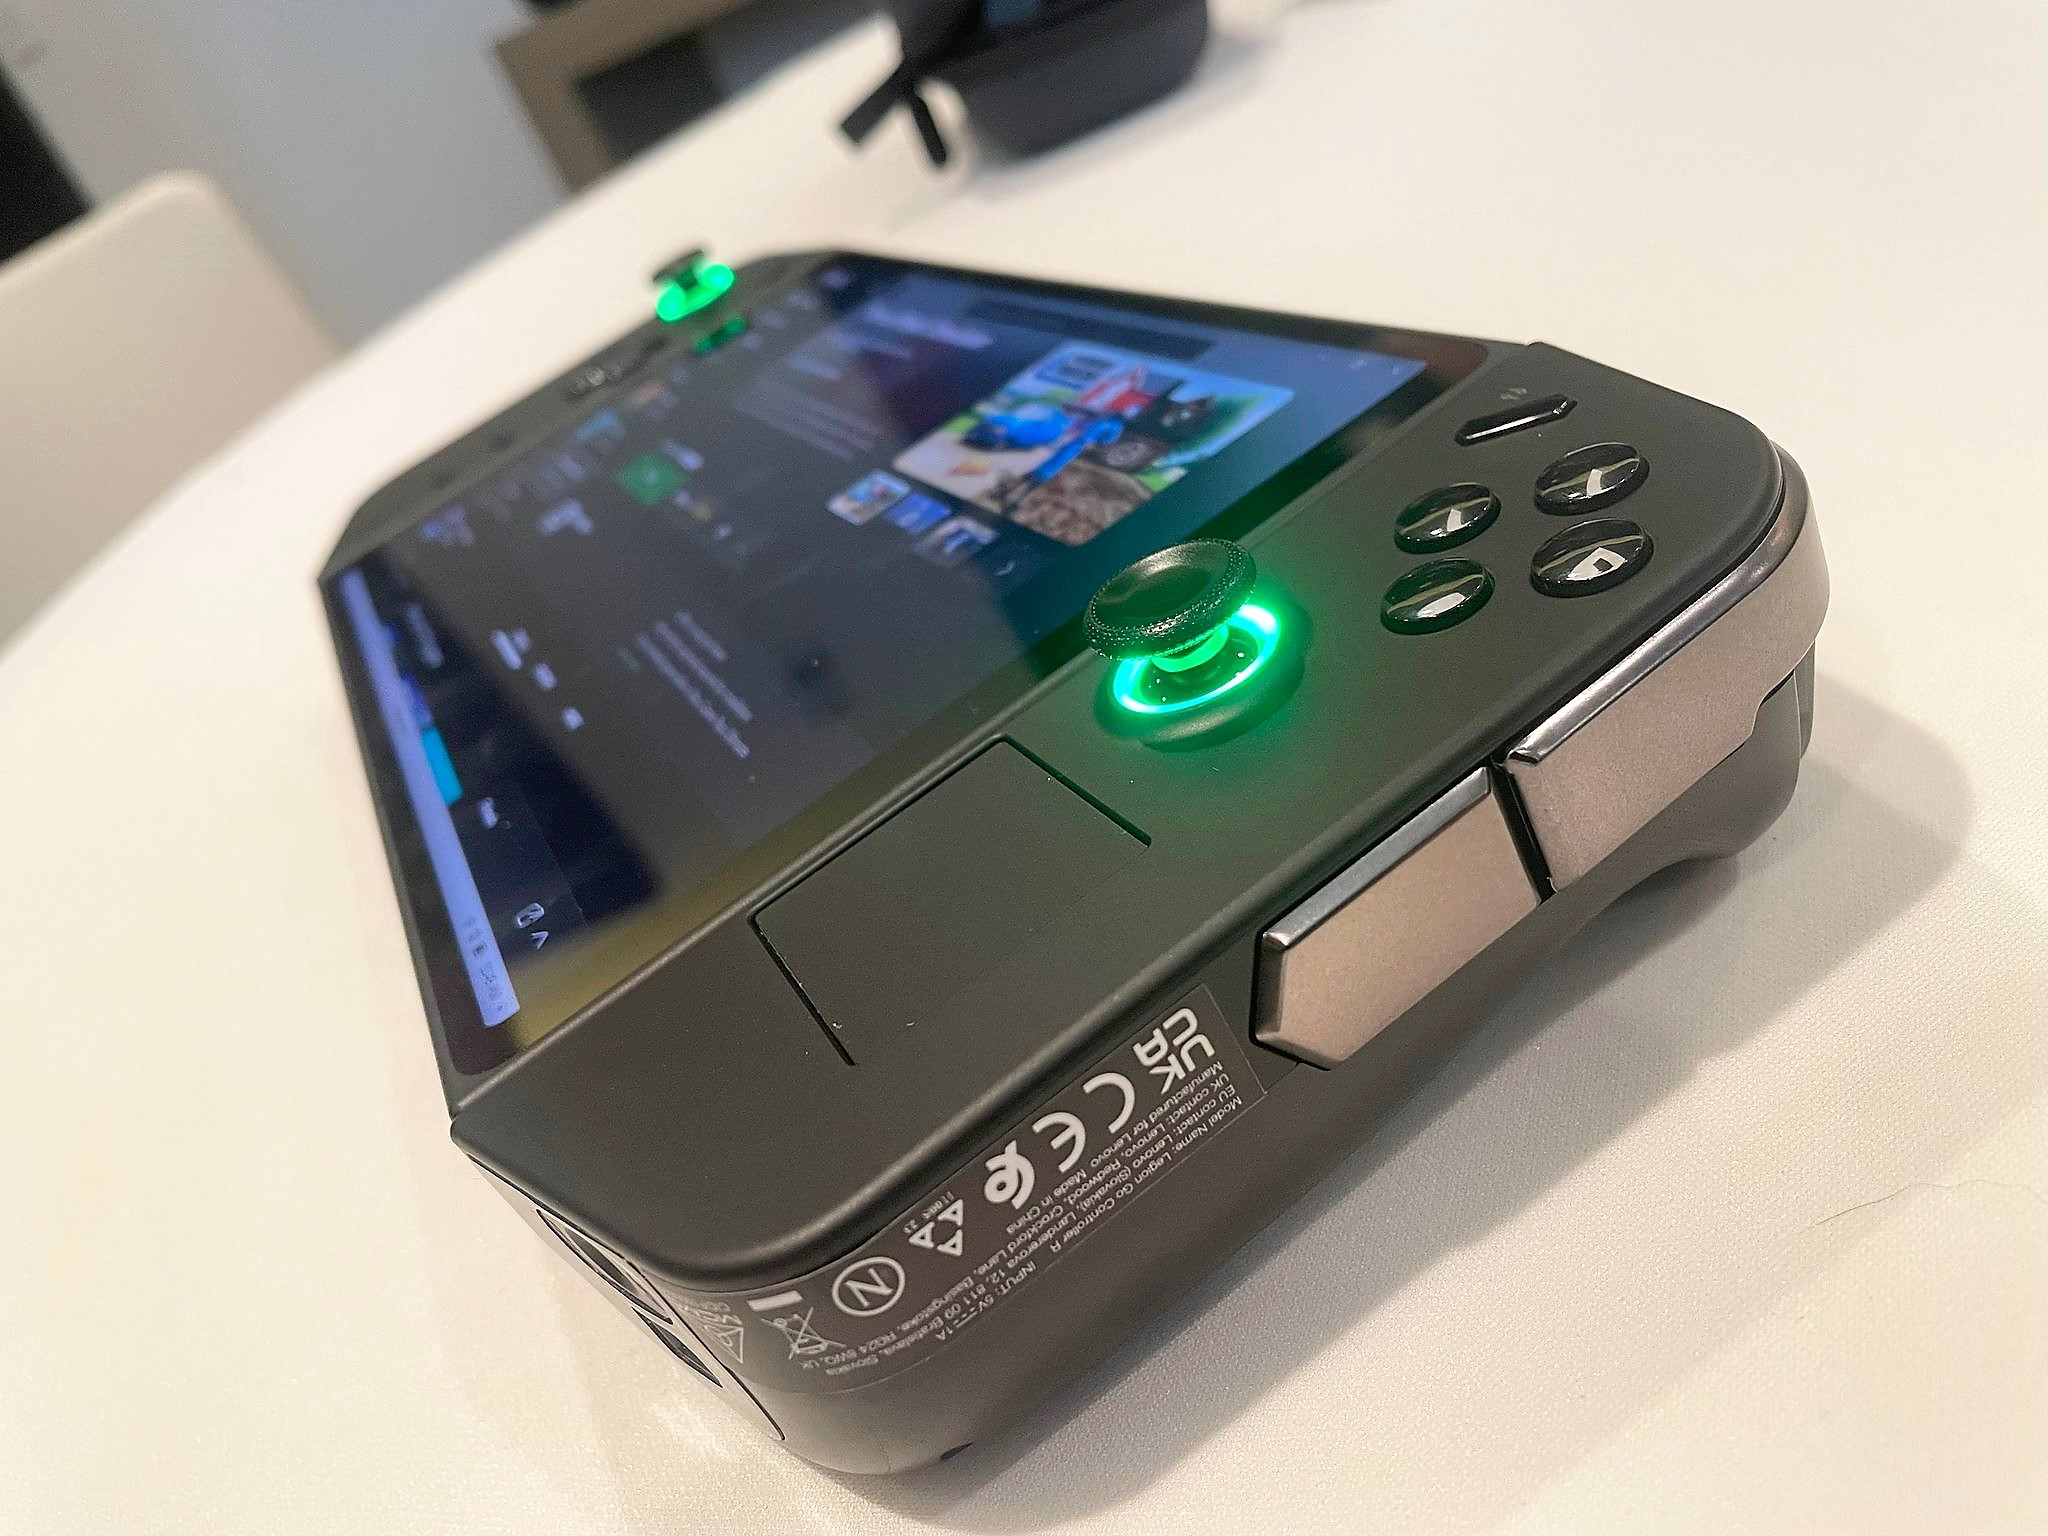 Lenovo Legion Go handheld gaming device leaks in official-looking